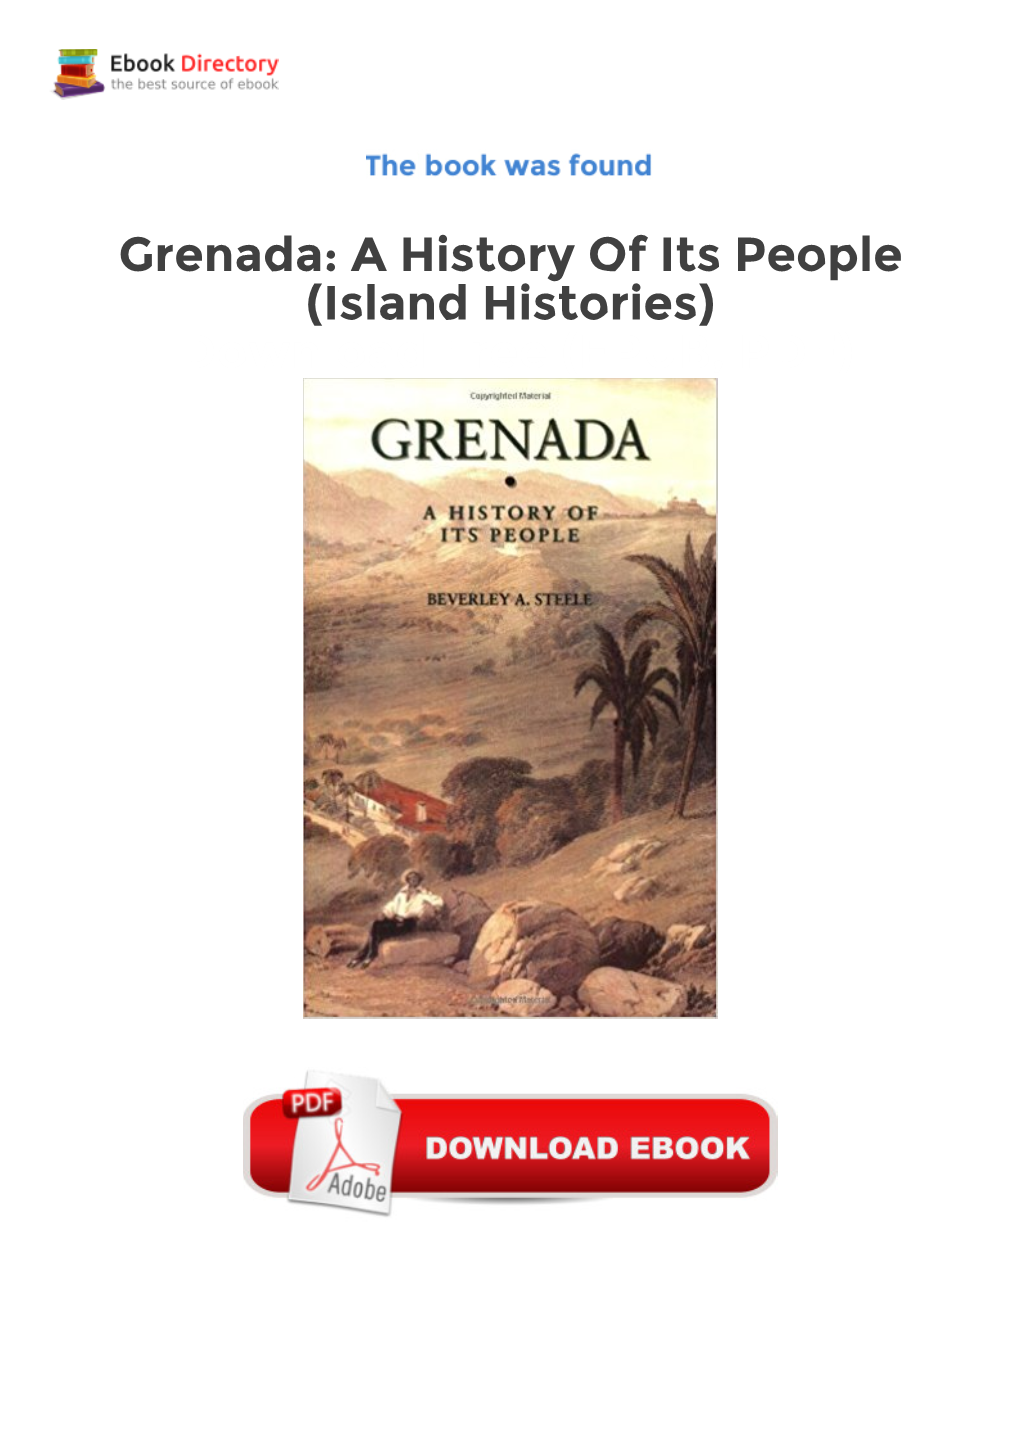 Grenada: a History of Its People (Island Histories) Download Free